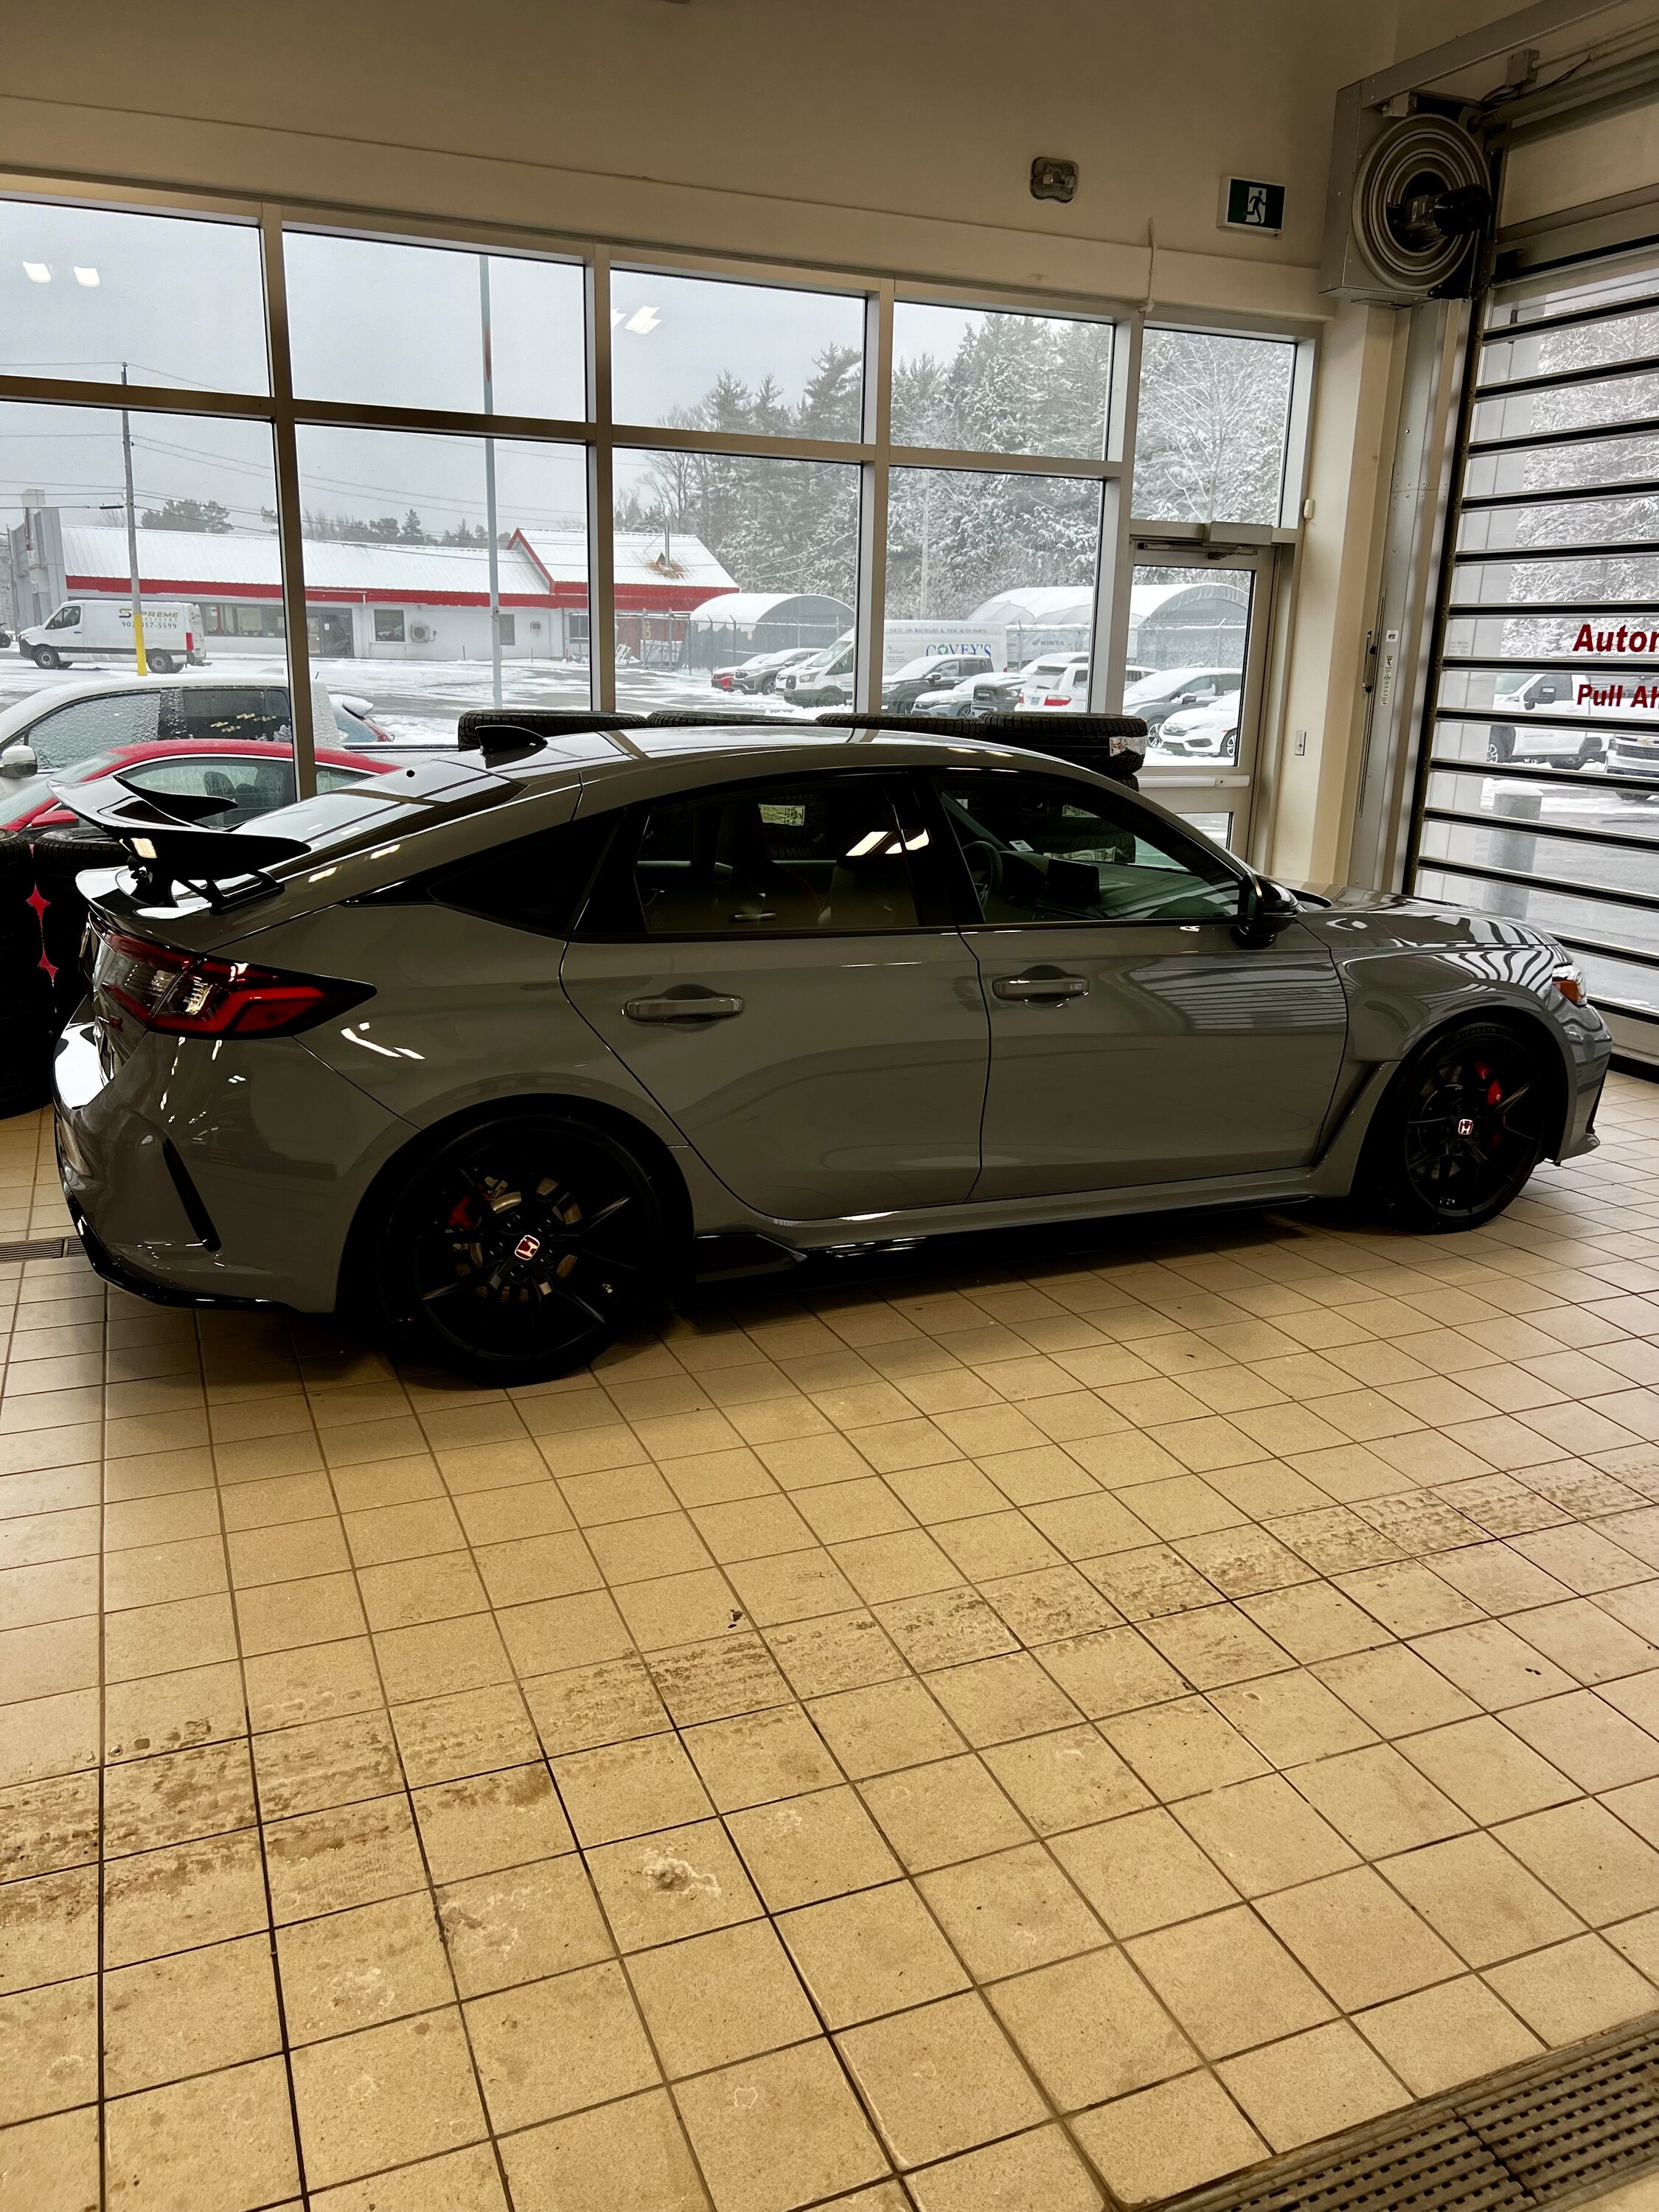 11th Gen Honda Civic Canadian dealer asked what colour Type R I want IMG_5698